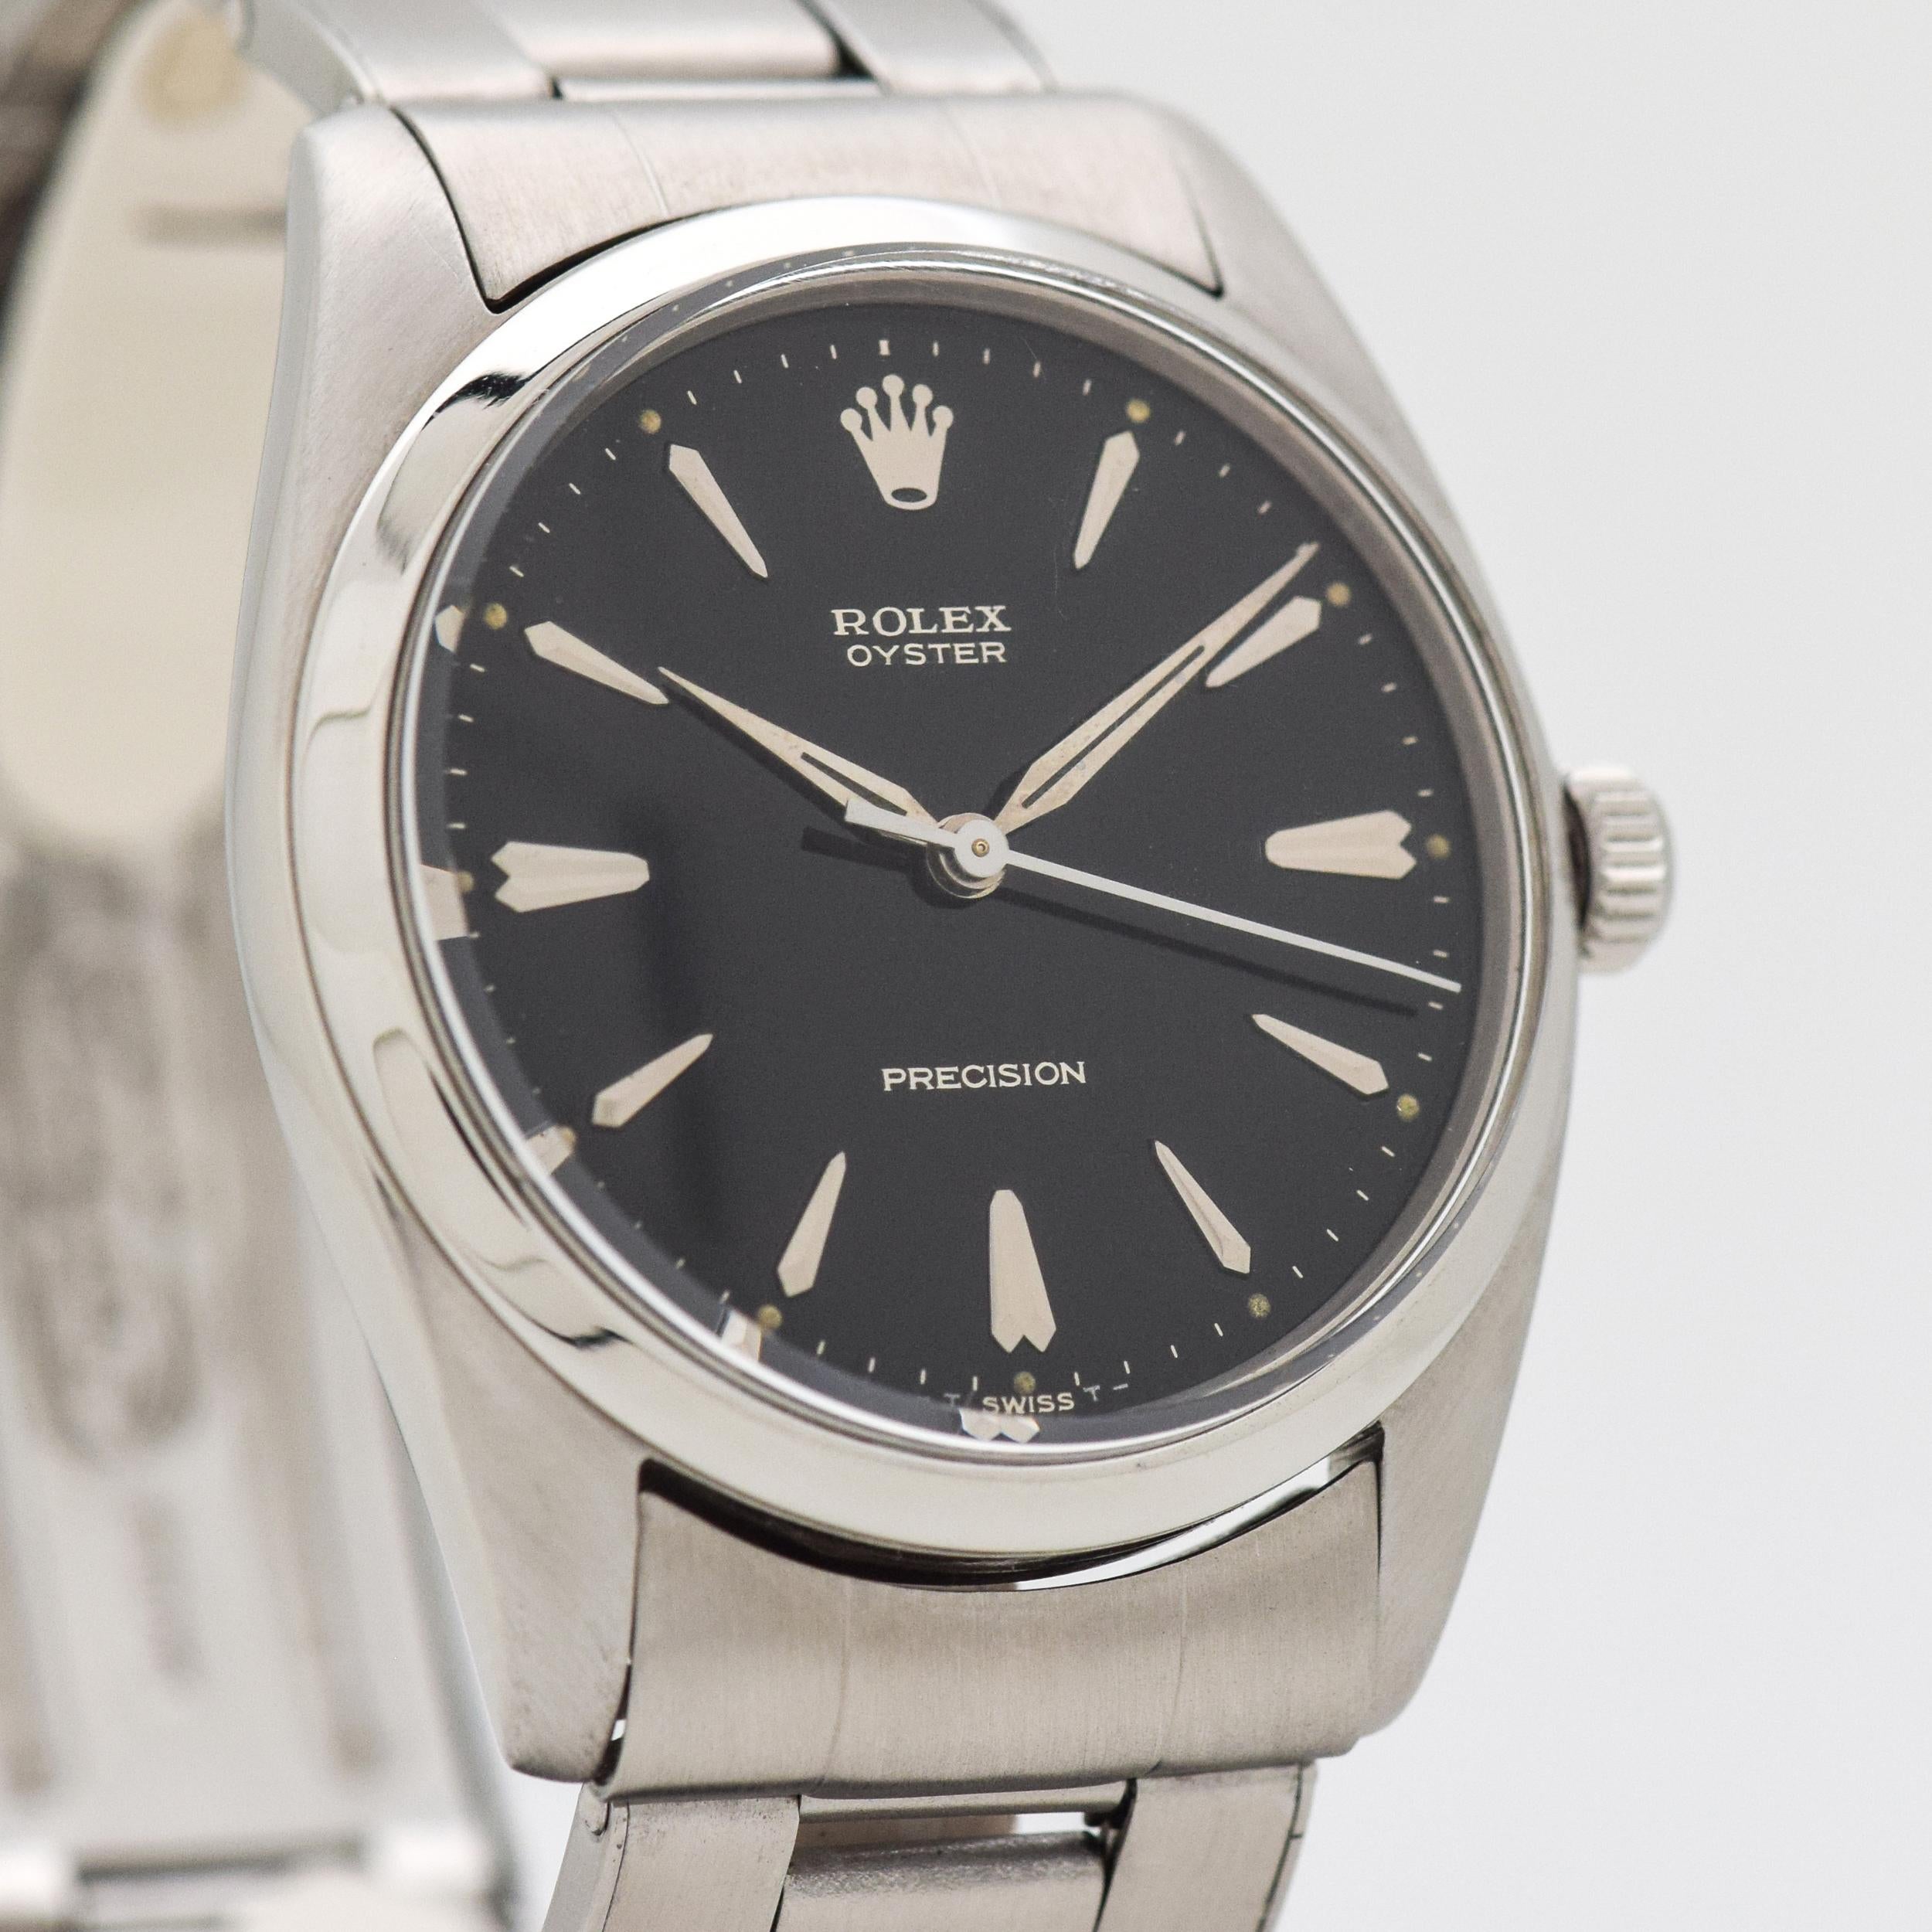 1958 Vintage Rolex Oyster Precision Ref. 6424 Stainless Steel watch with Black Dial with Applied Steel Beveled Pointed Tapering Markers. Case size, 35mm x 42mm lug to lug (1.38 in. x 1.65 in.) - Powered by a 17-jewel, manual caliber movement. Triple